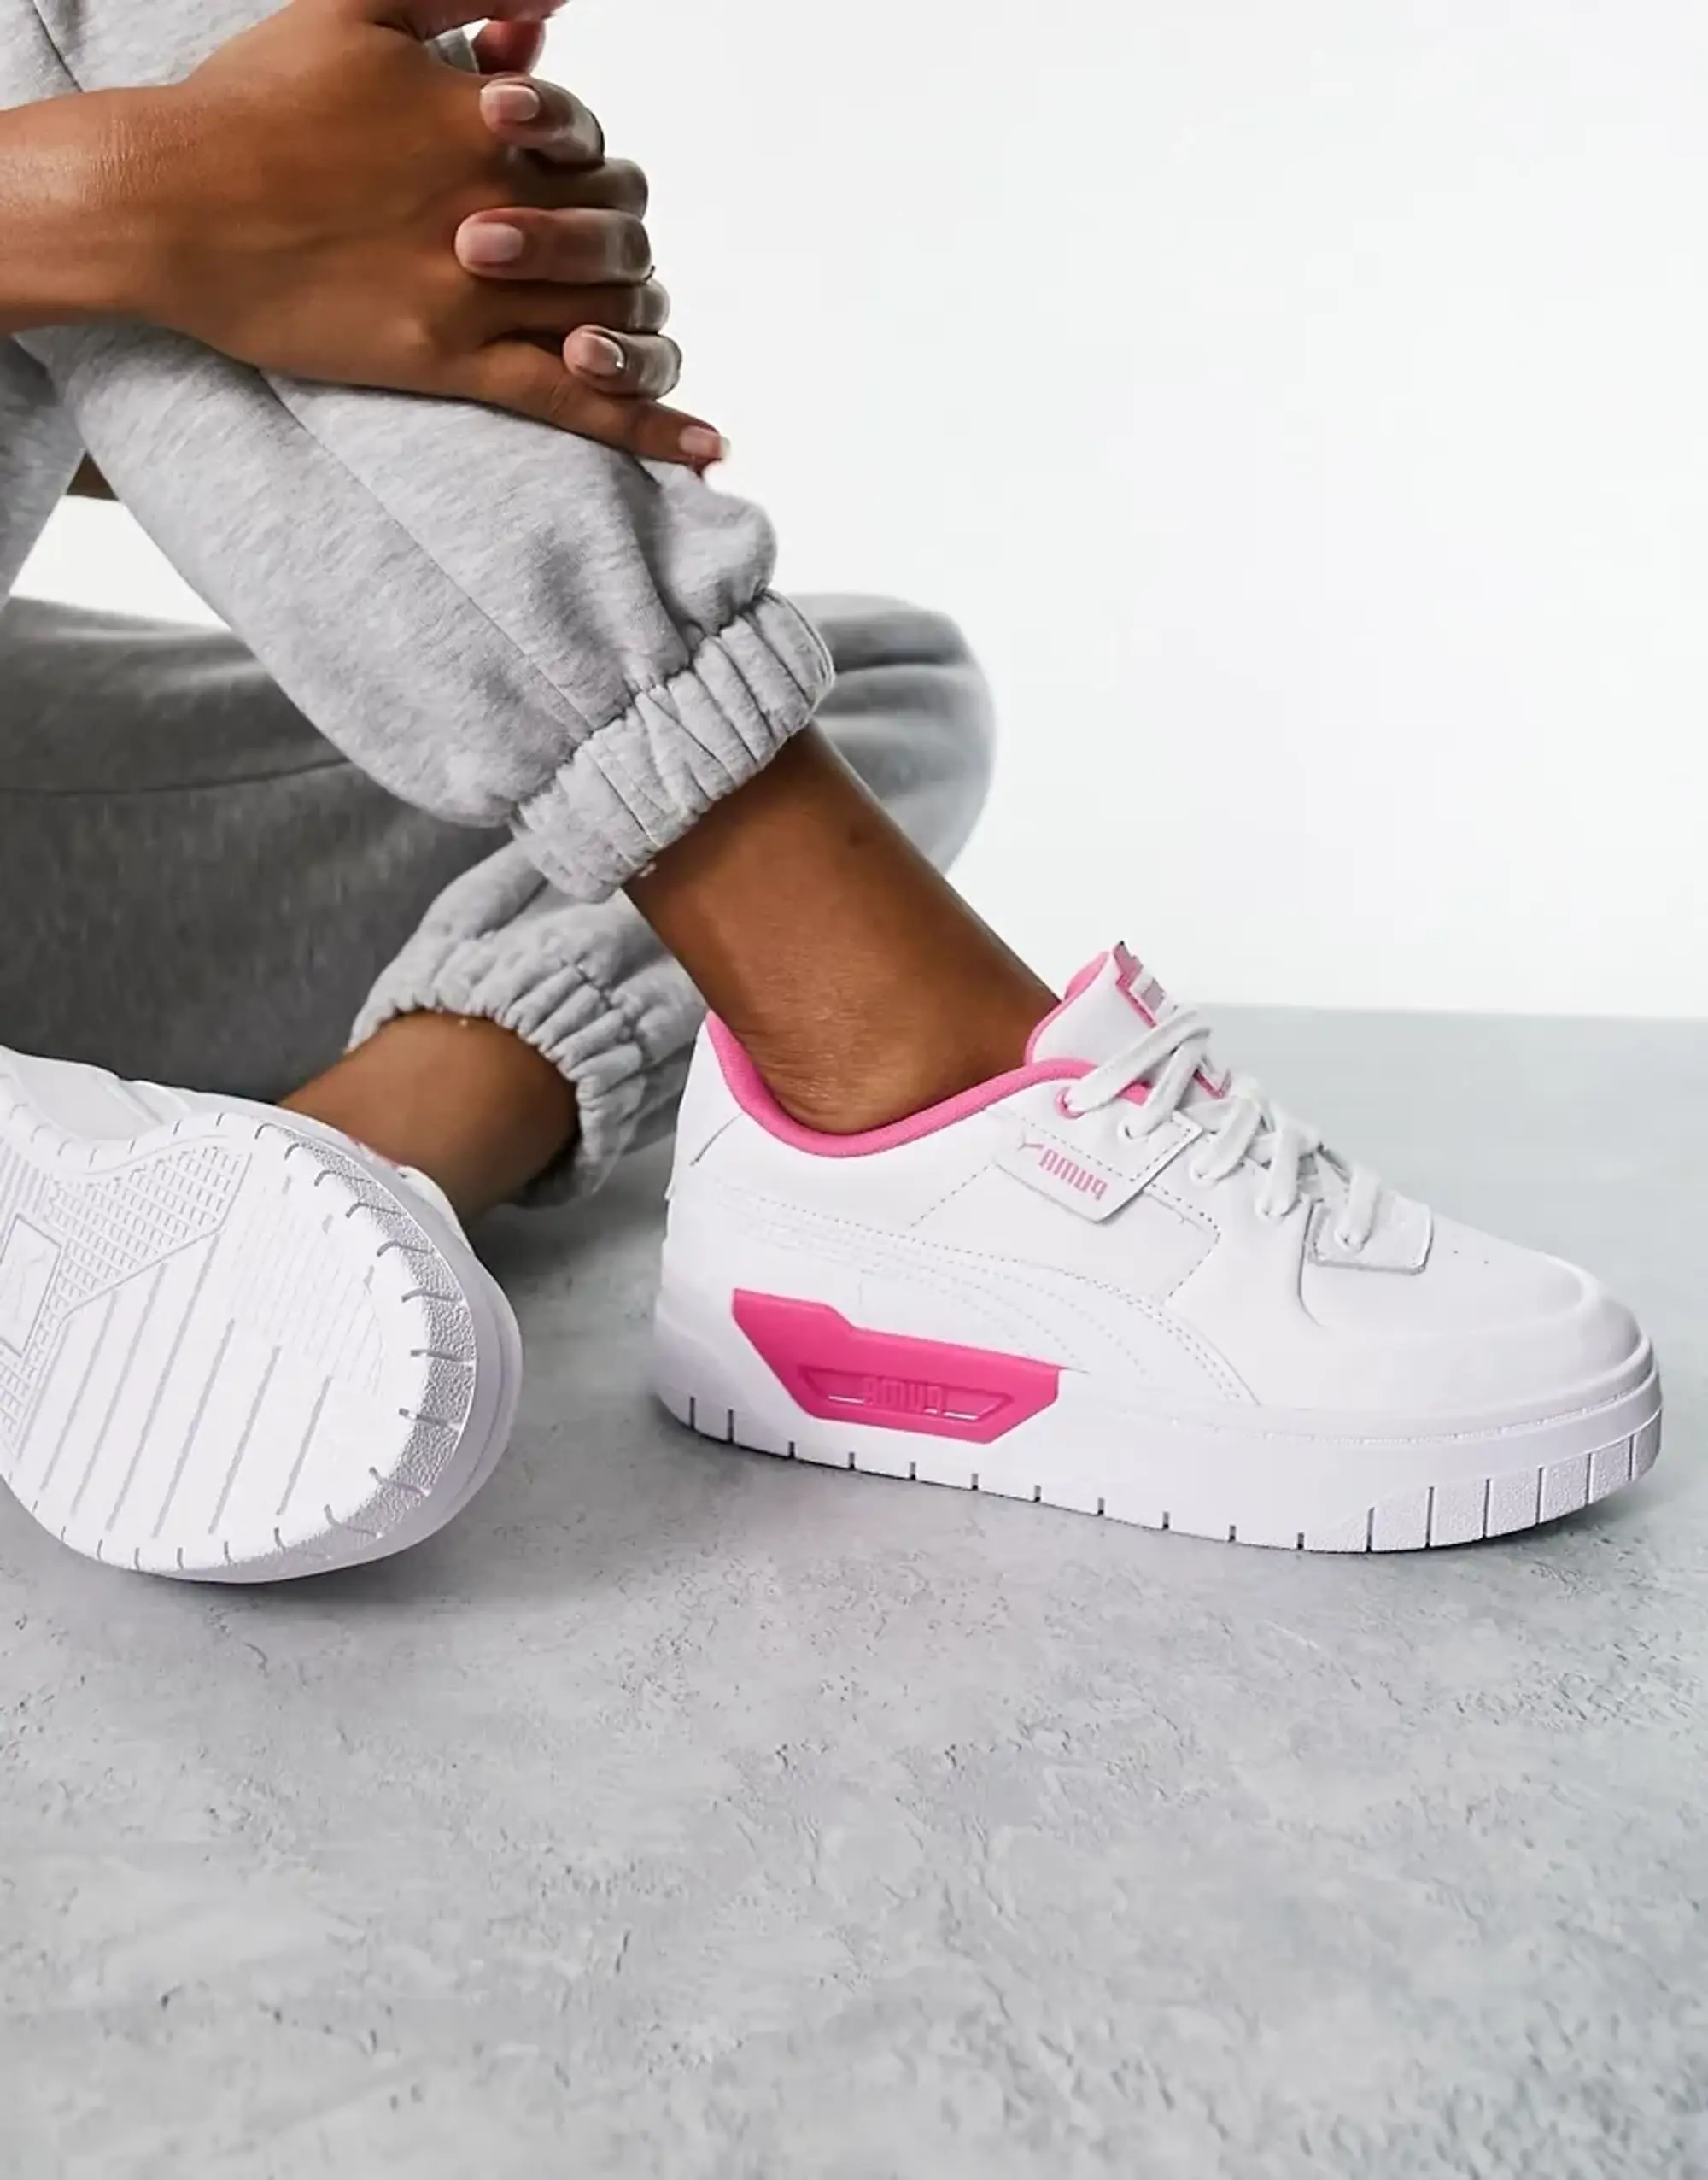 Puma Cali Dream Trainers In White And Acid Pink - Exclusive To Asos